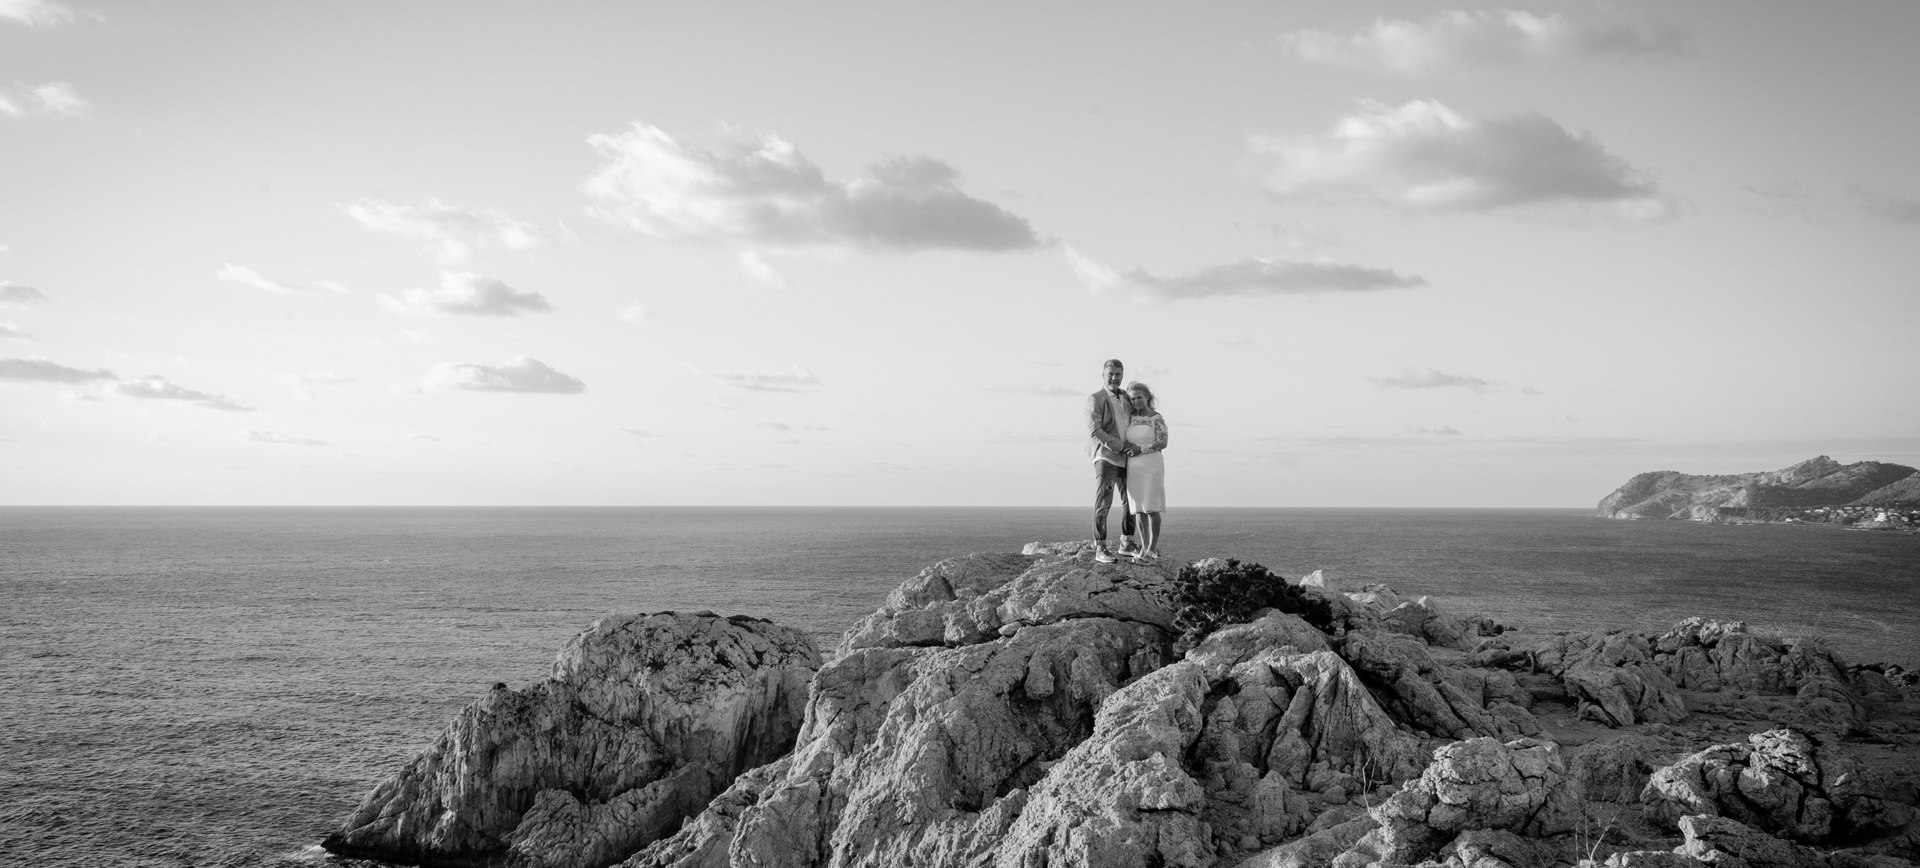 Mallorca After Wedding Photos - bride and groom black and white wedding photo